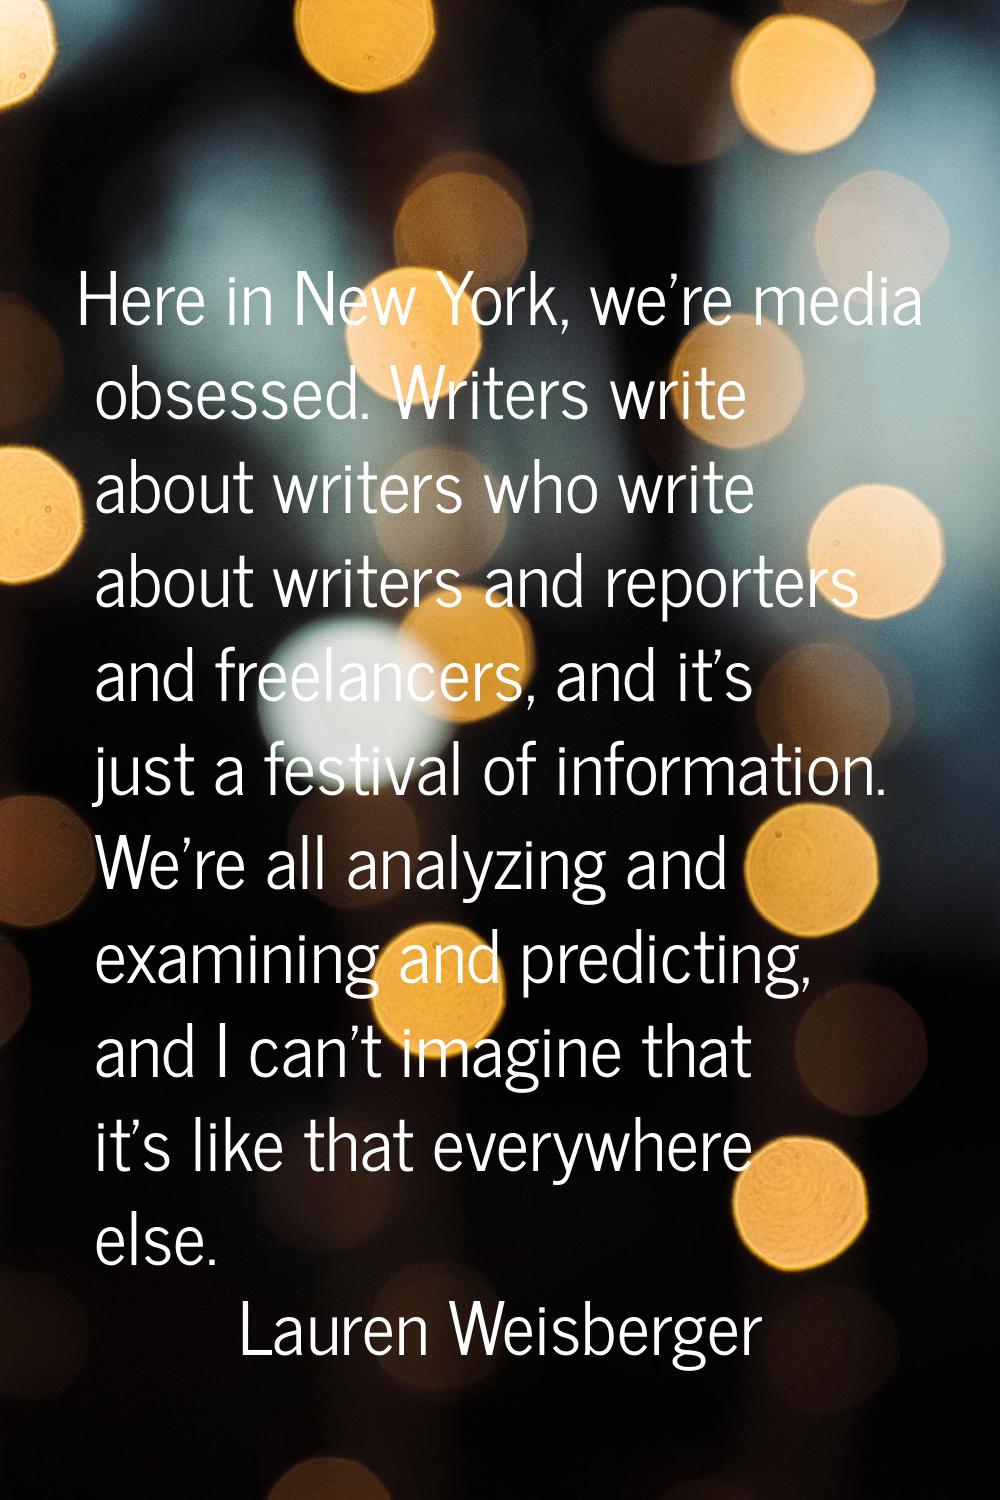 Here in New York, we're media obsessed. Writers write about writers who write about writers and rep